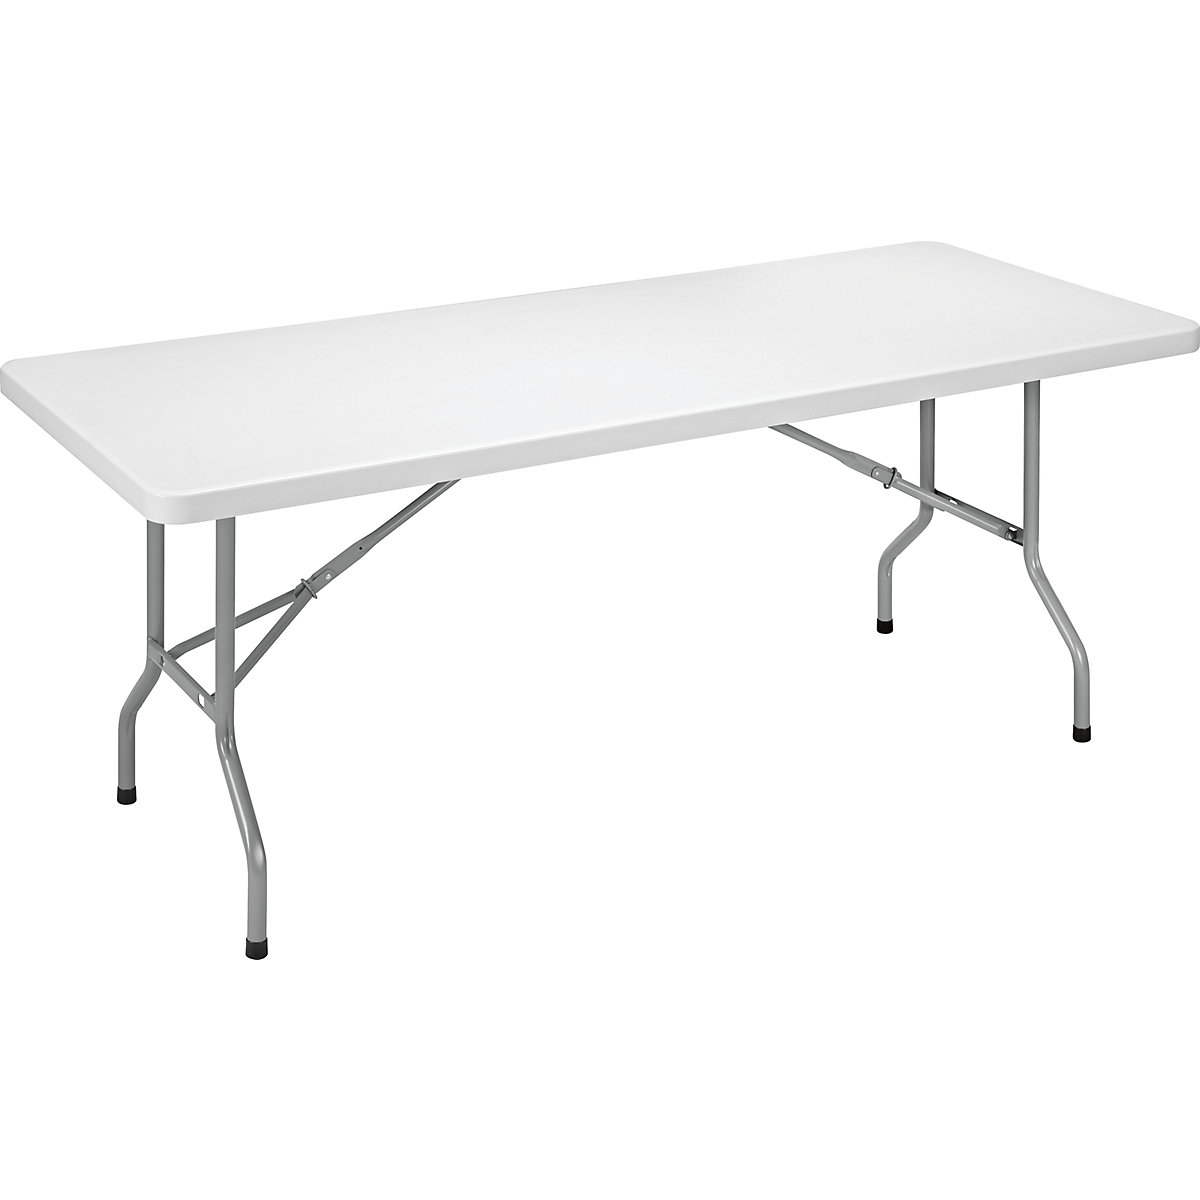 Folding table with plastic top